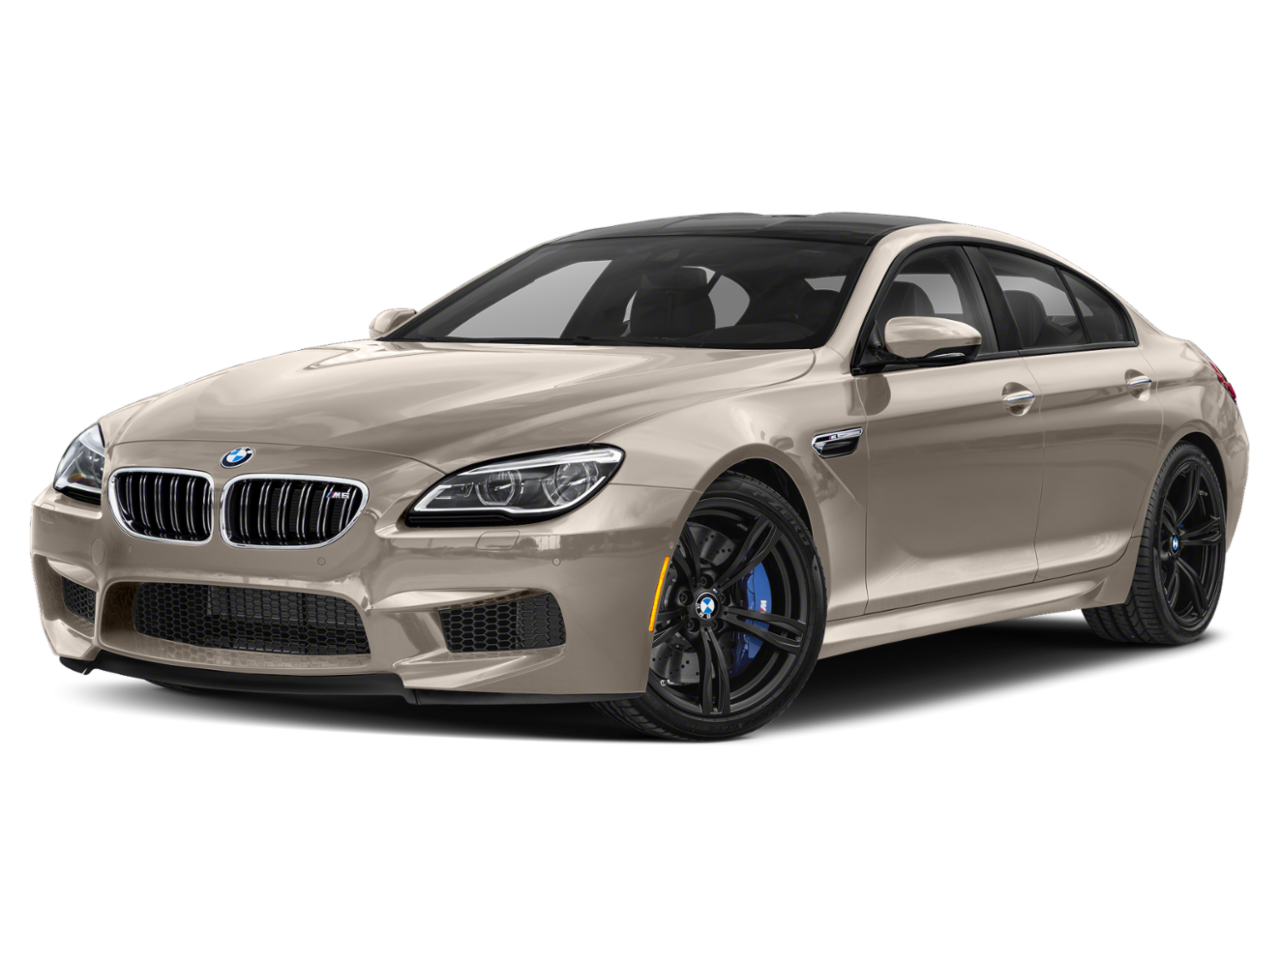 2019 BMW M6 Gran Coupe Repair: Service and Maintenance Cost